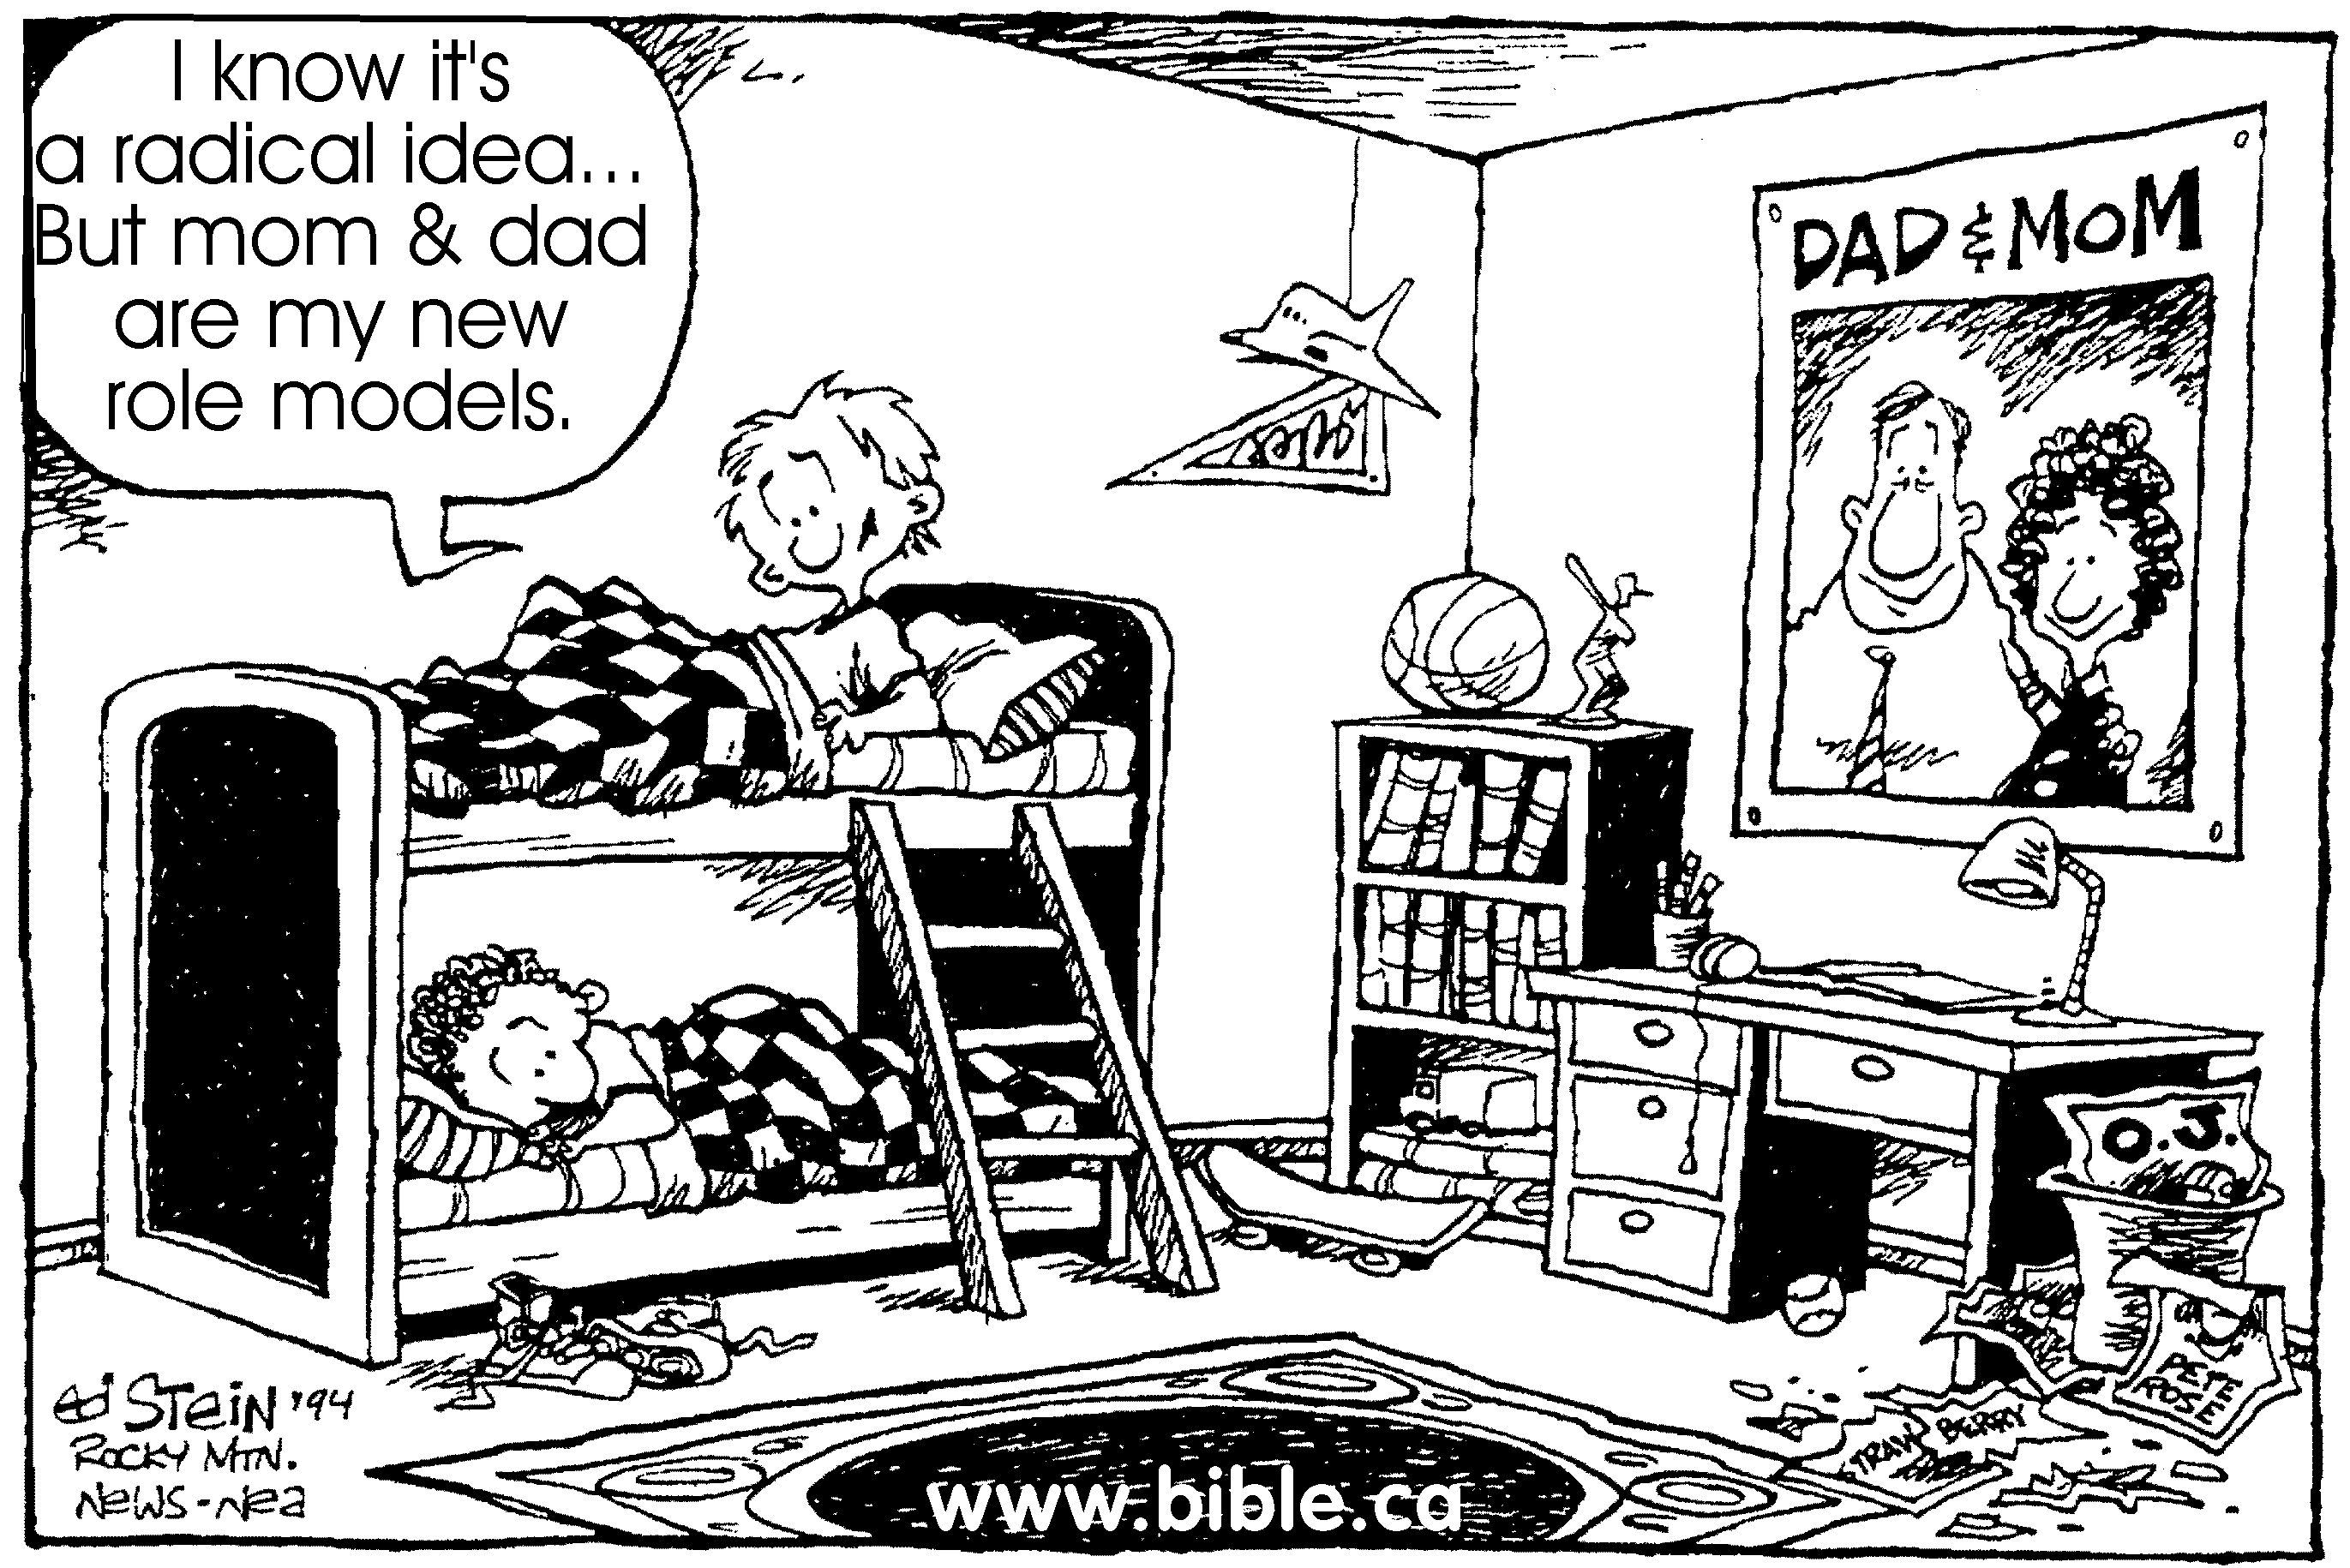 http://www.bible.ca/marriage/childl-role-model-parents.gif